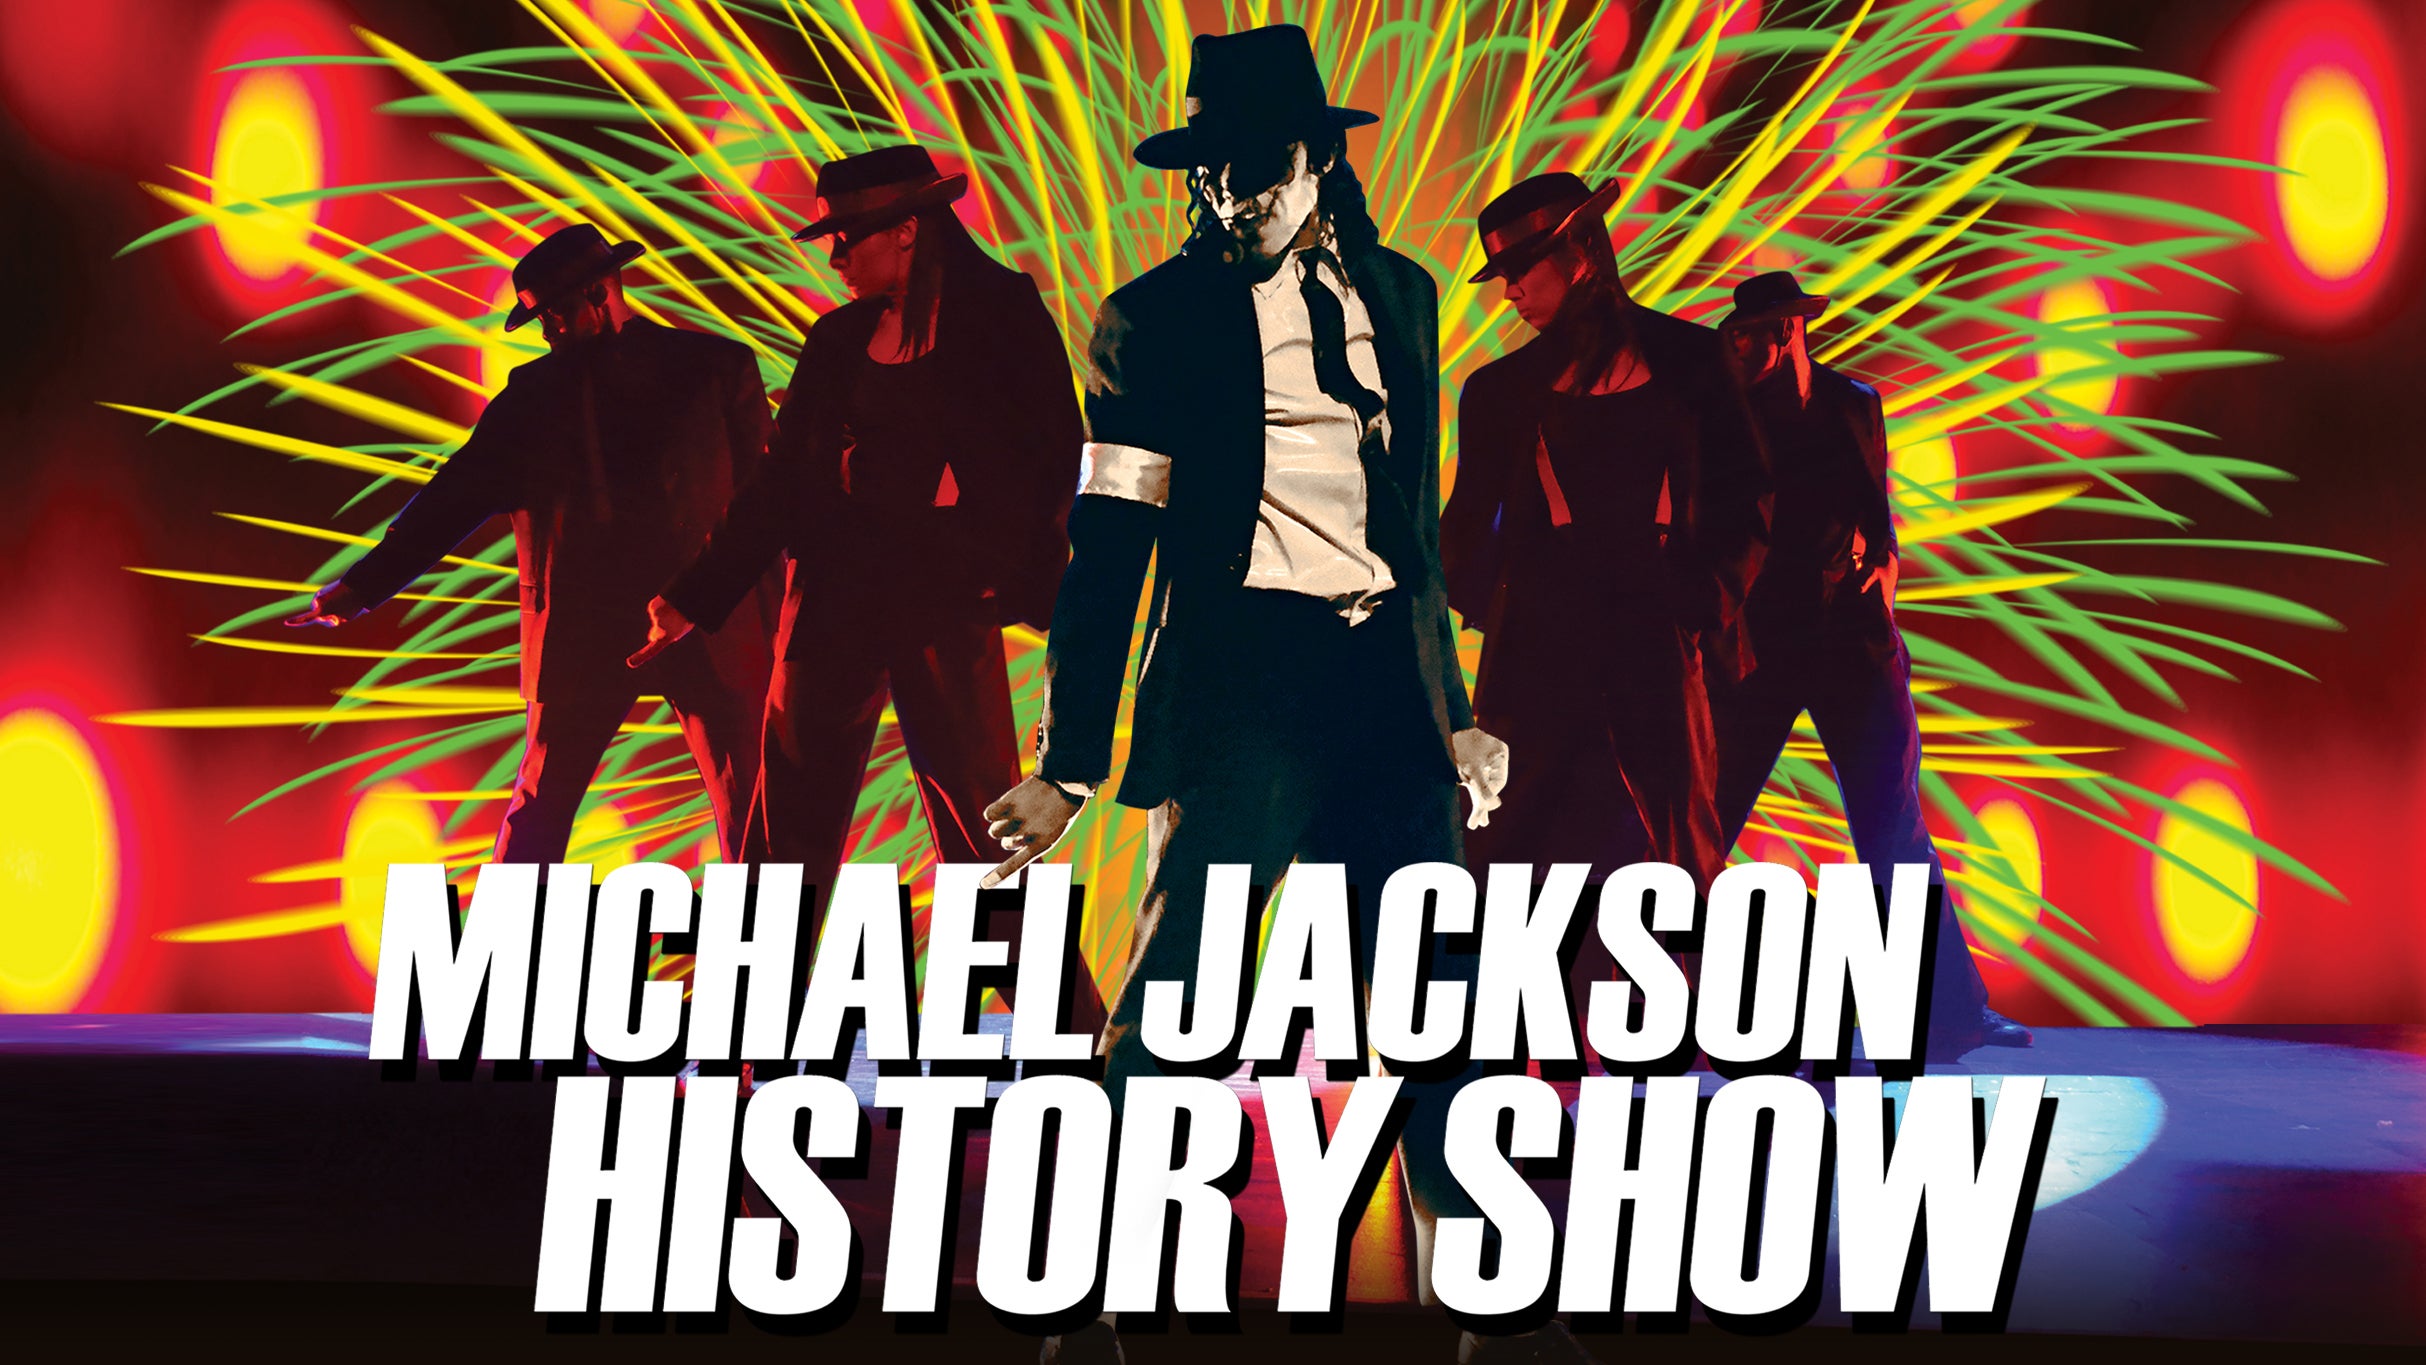 The Michael Jackson HIStory Show in Winnipeg promo photo for Mother's Day  presale offer code